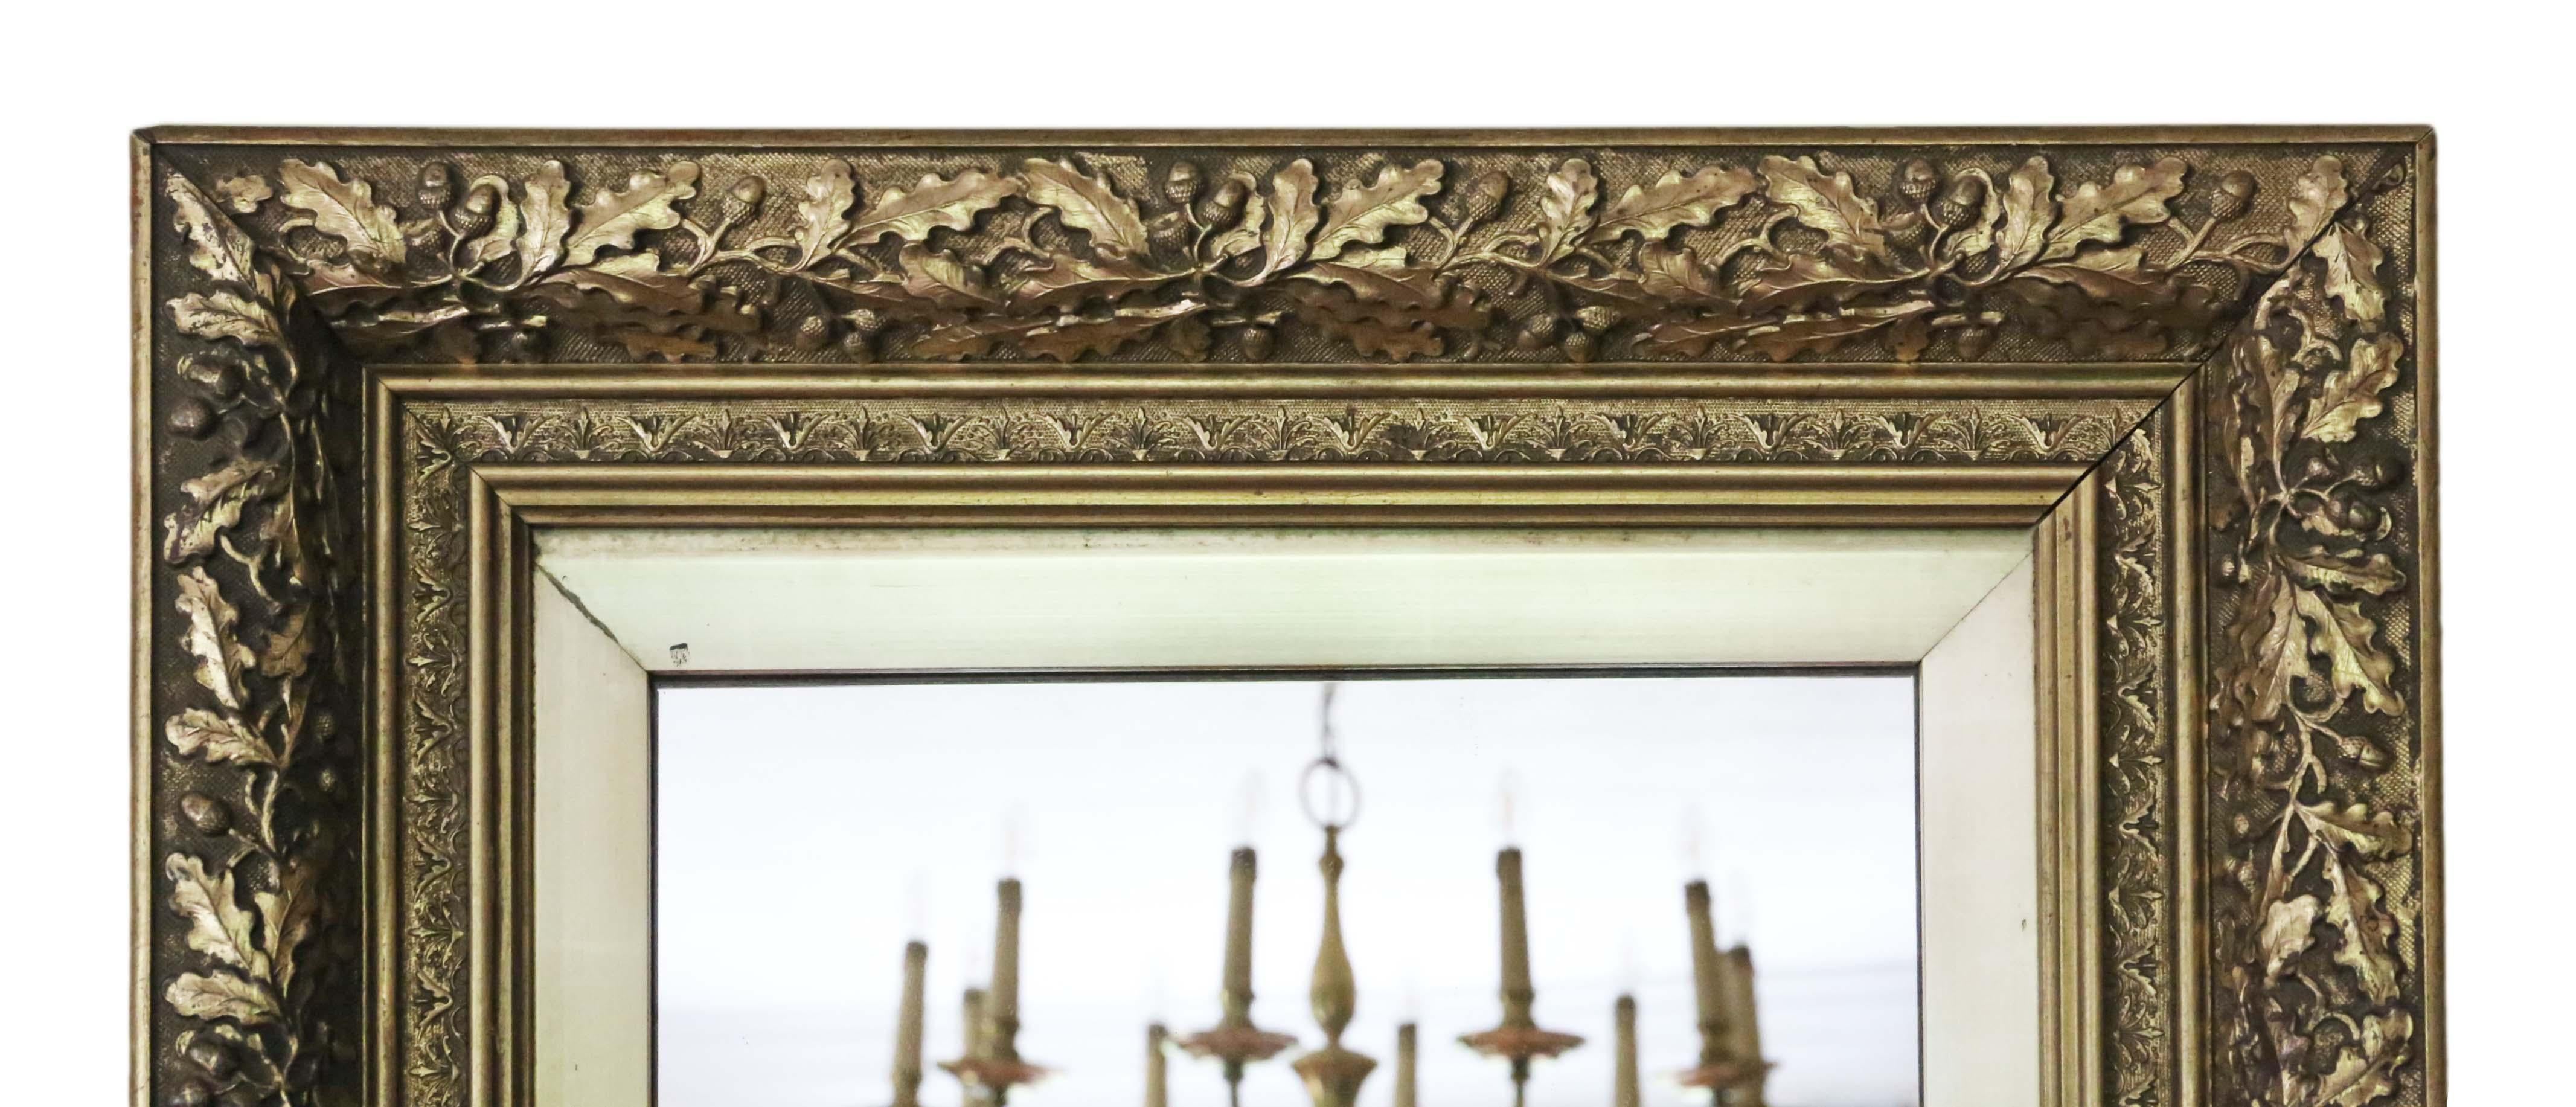 Antique large fine quality gilt 19th century overmantle / wall mirror. Lovely charm and elegance. Could be hung in portrait or landscape.

An impressive and rare find, that would look amazing in the right location. No woodworm.

The mirrored